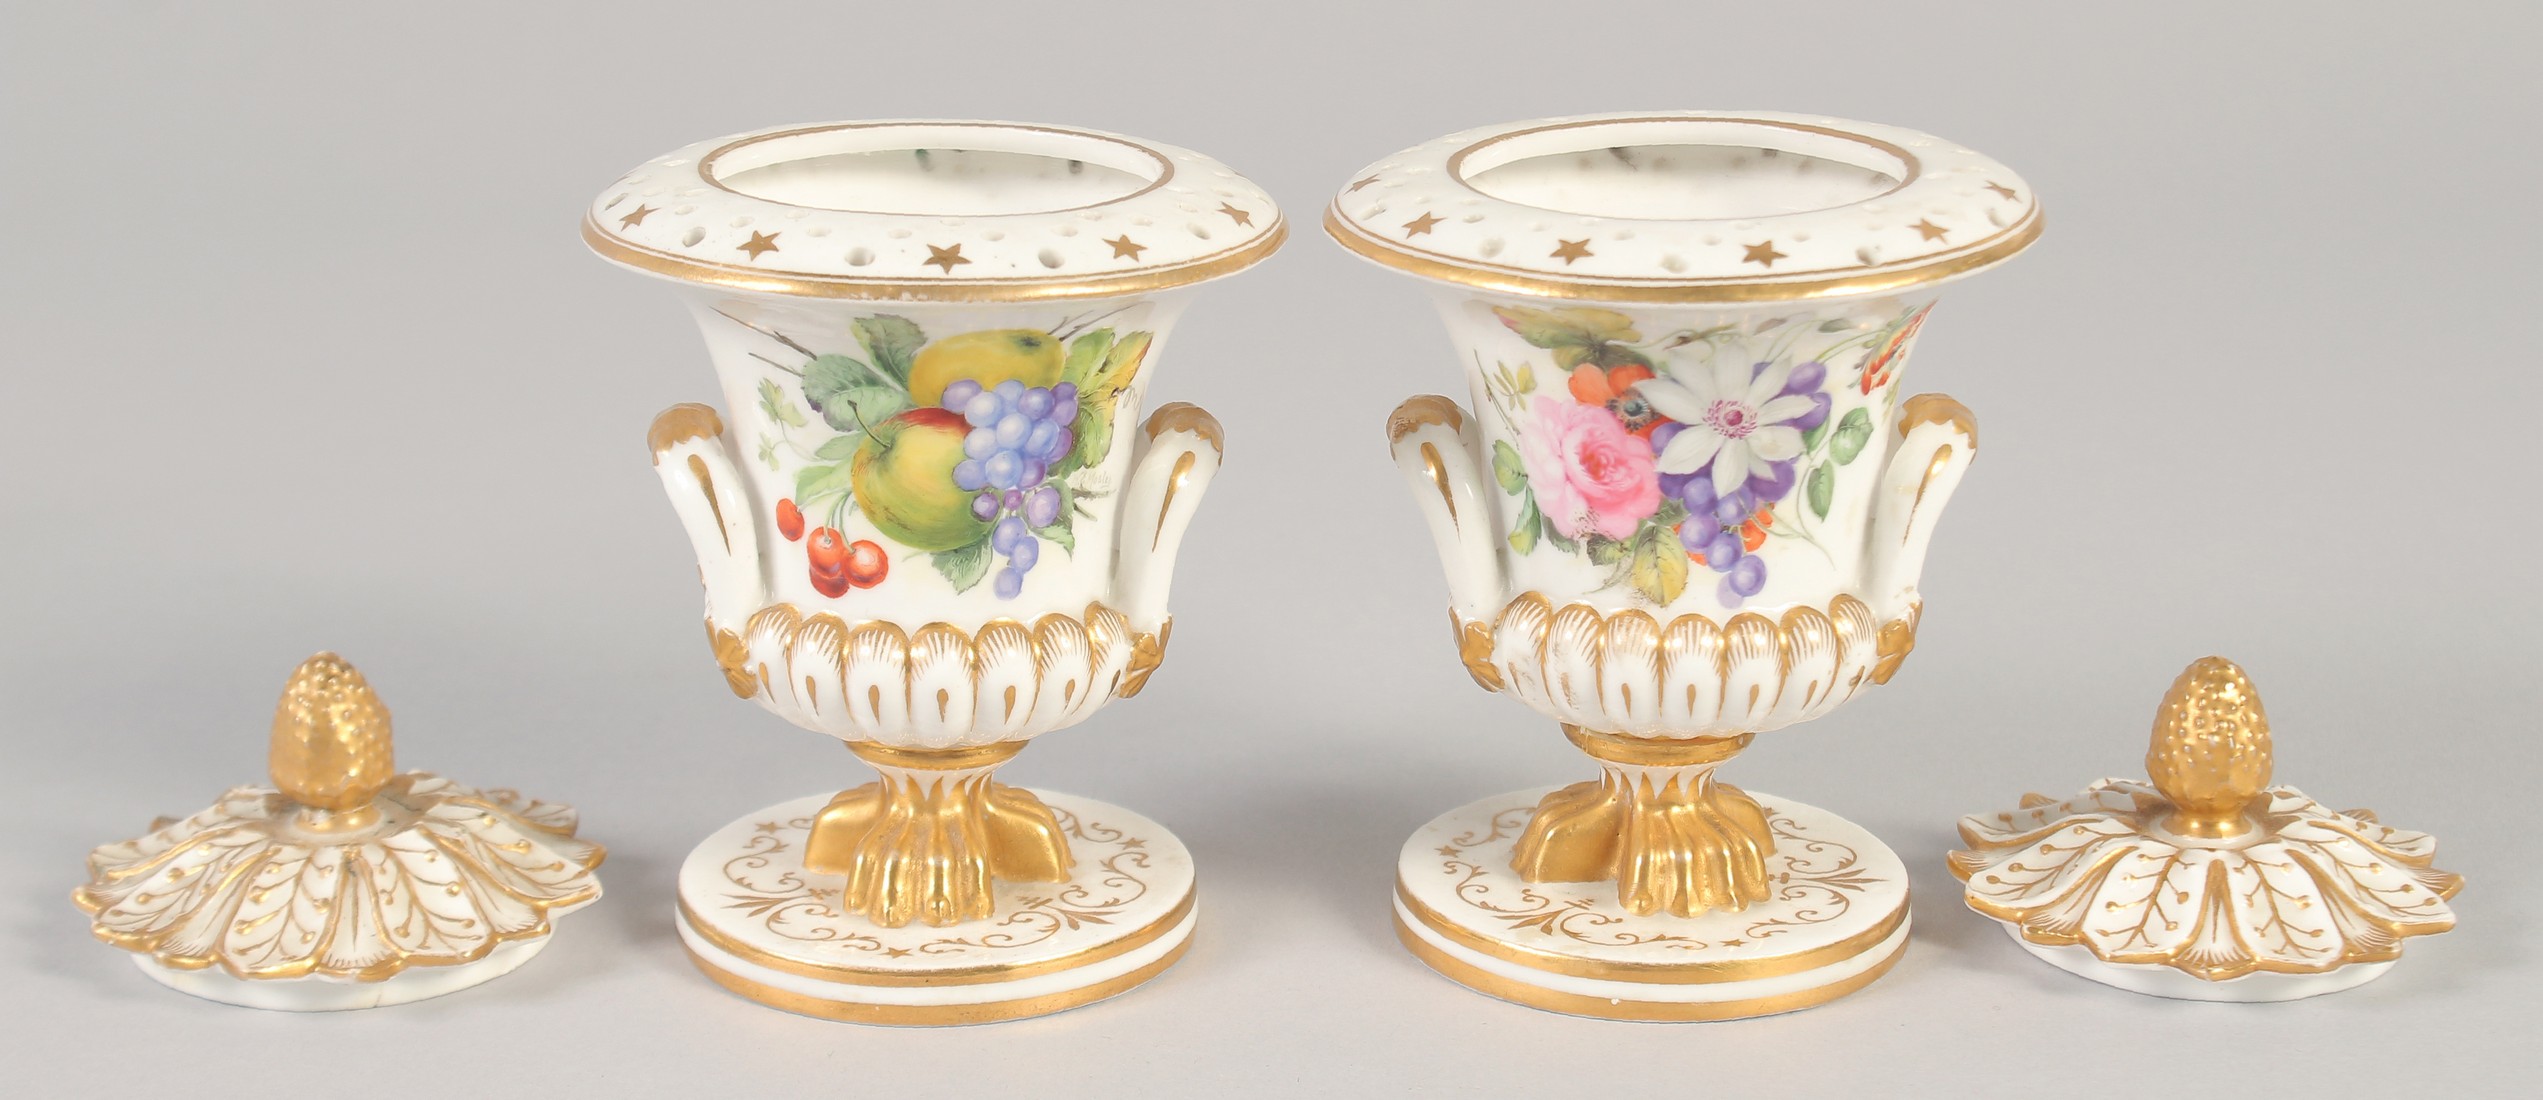 19TH CENTURY DERBY PAIR OF POTPOURRI VASES AND COVERS each side painted with either flowers or - Image 3 of 5